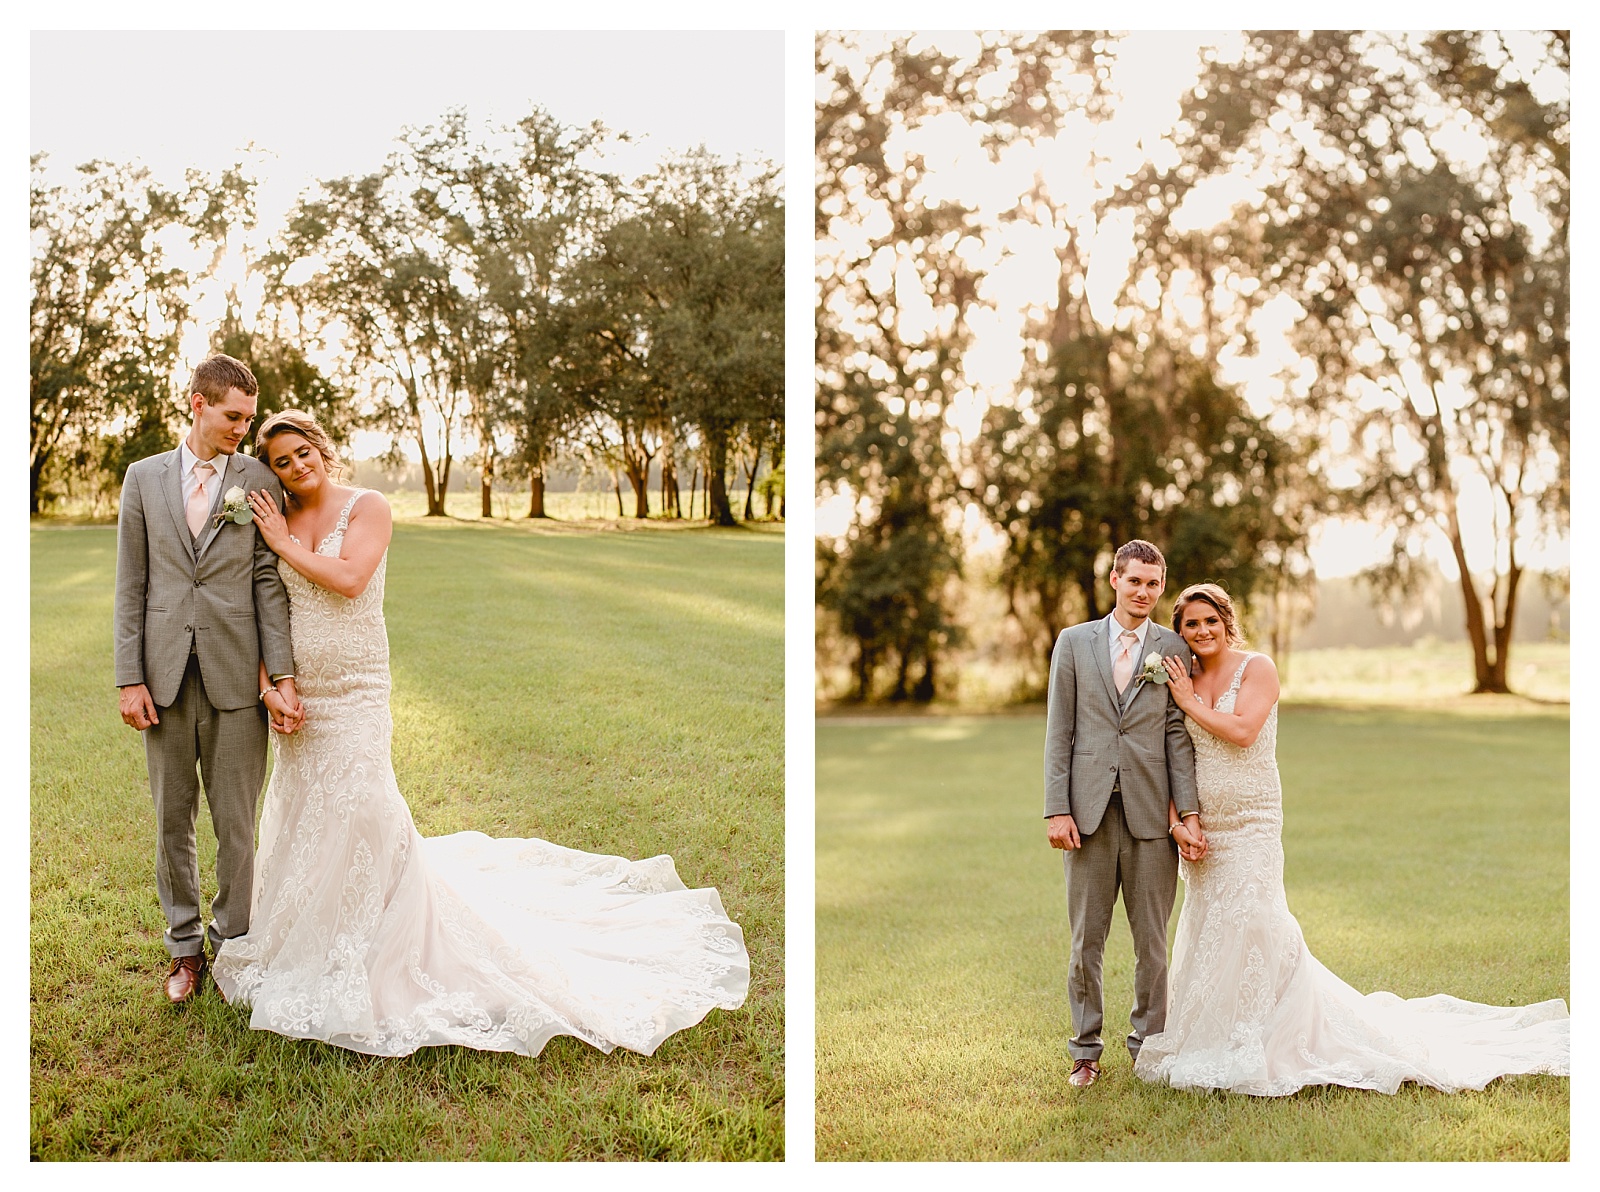 Sunset photos with the bride and groom during the reception. Shelly Williams Photography